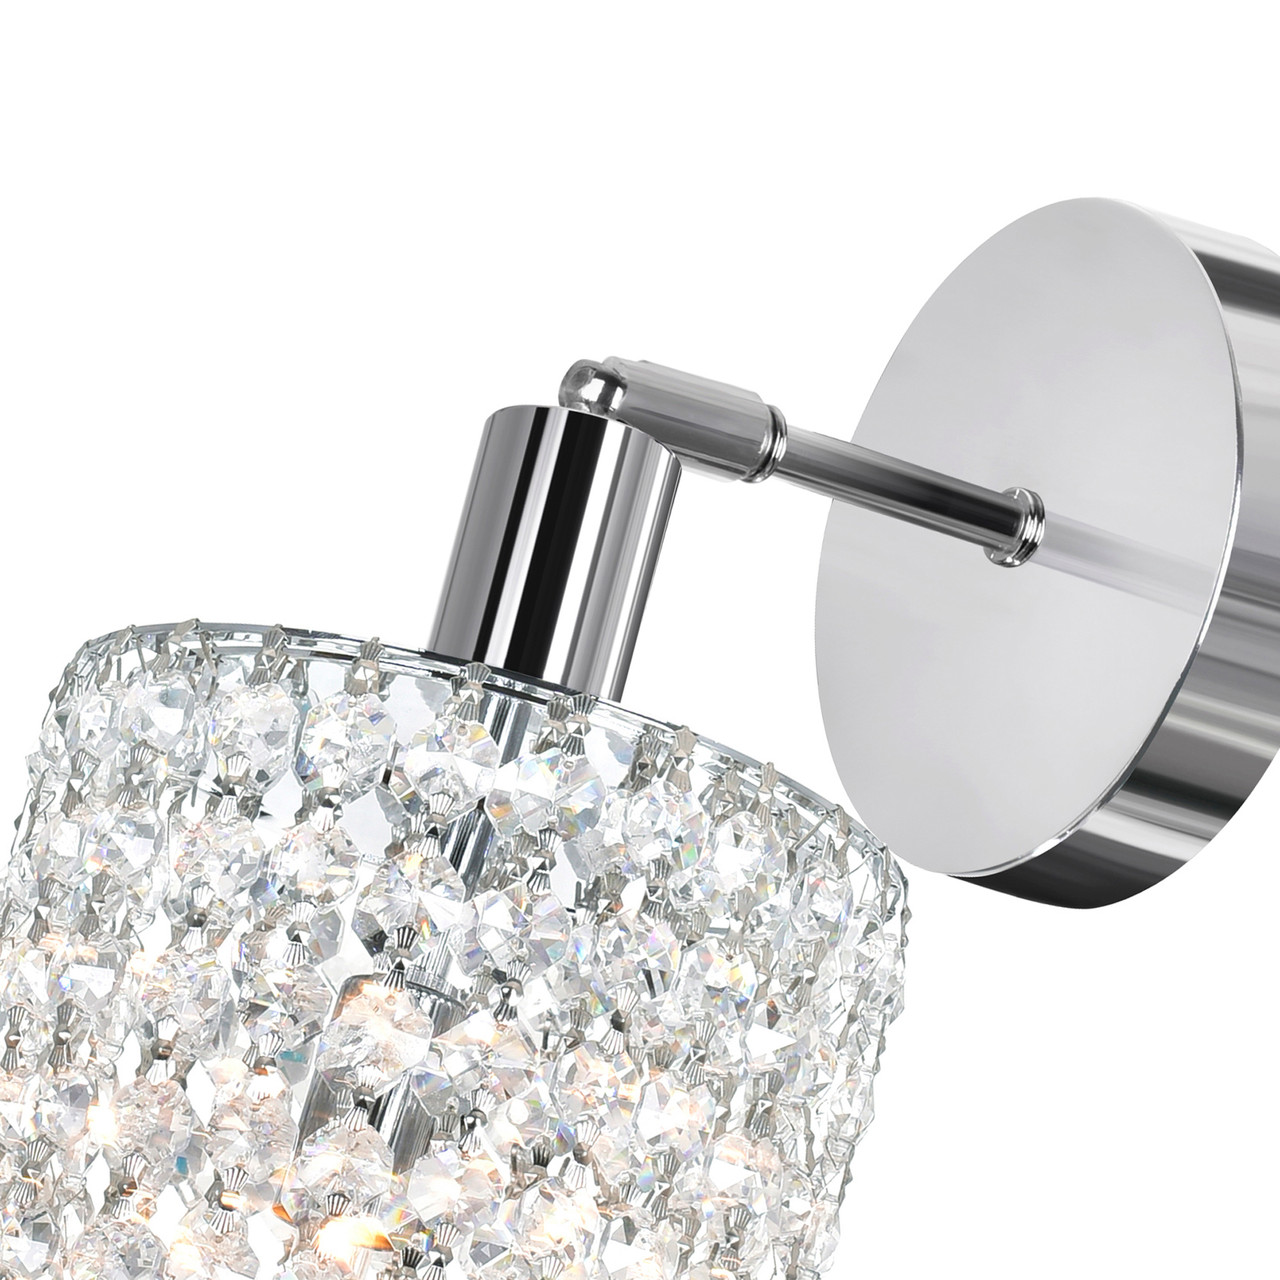 CWI LIGHTING 4281W-R-R (Clear) 1 Light Bathroom Sconce with Chrome finish